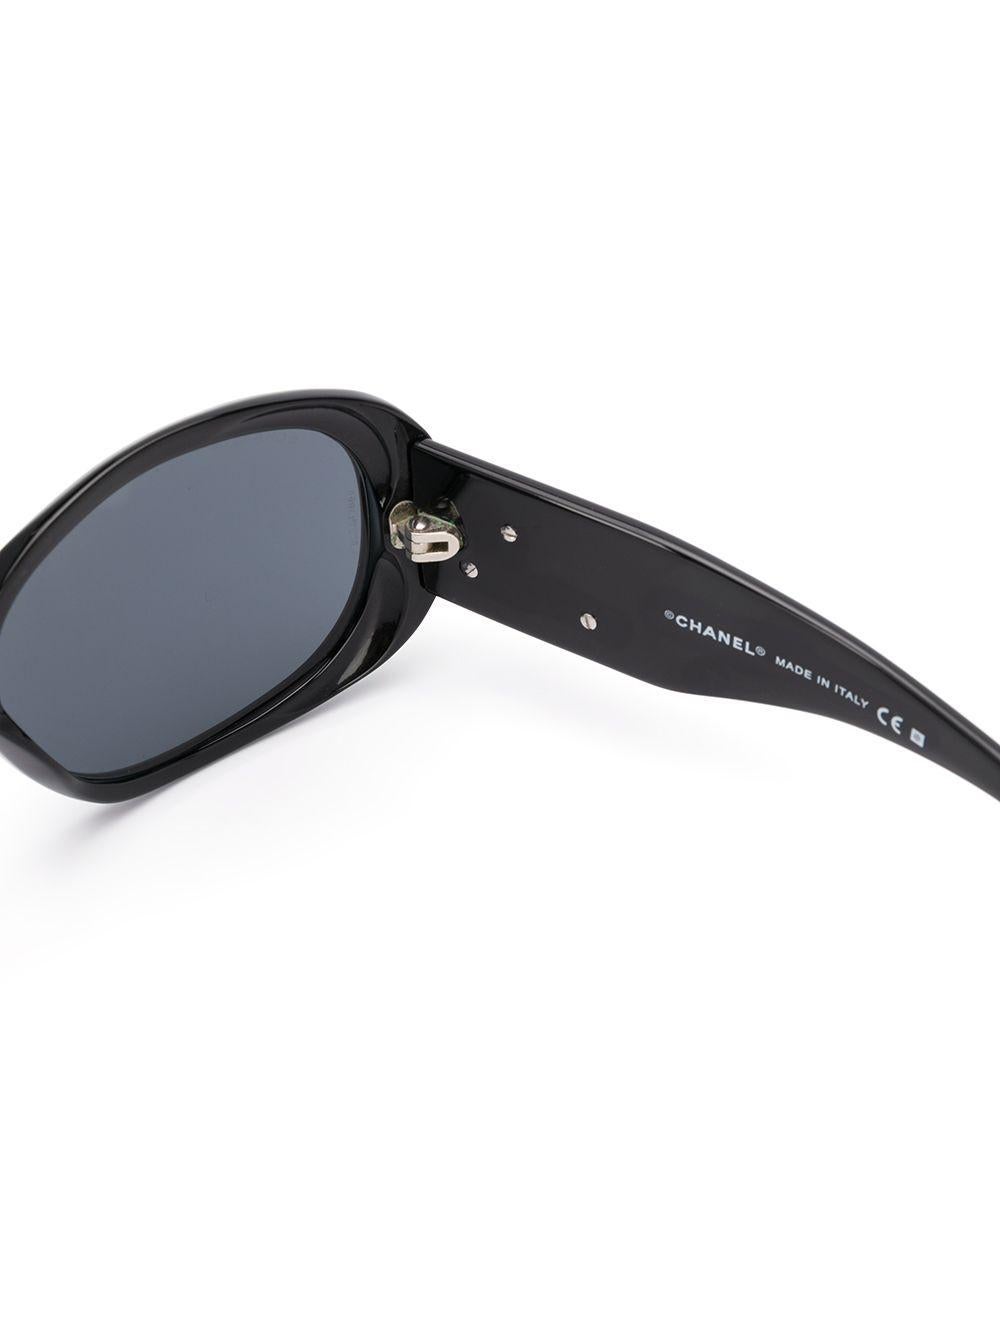 Crafted in France from pure black acetate, these sunglasses elevate a classic silhouette with round, oversized-frames, tinted lenses and straight arms with curved tips.

This item includes its original leather protective Chanel case and lens